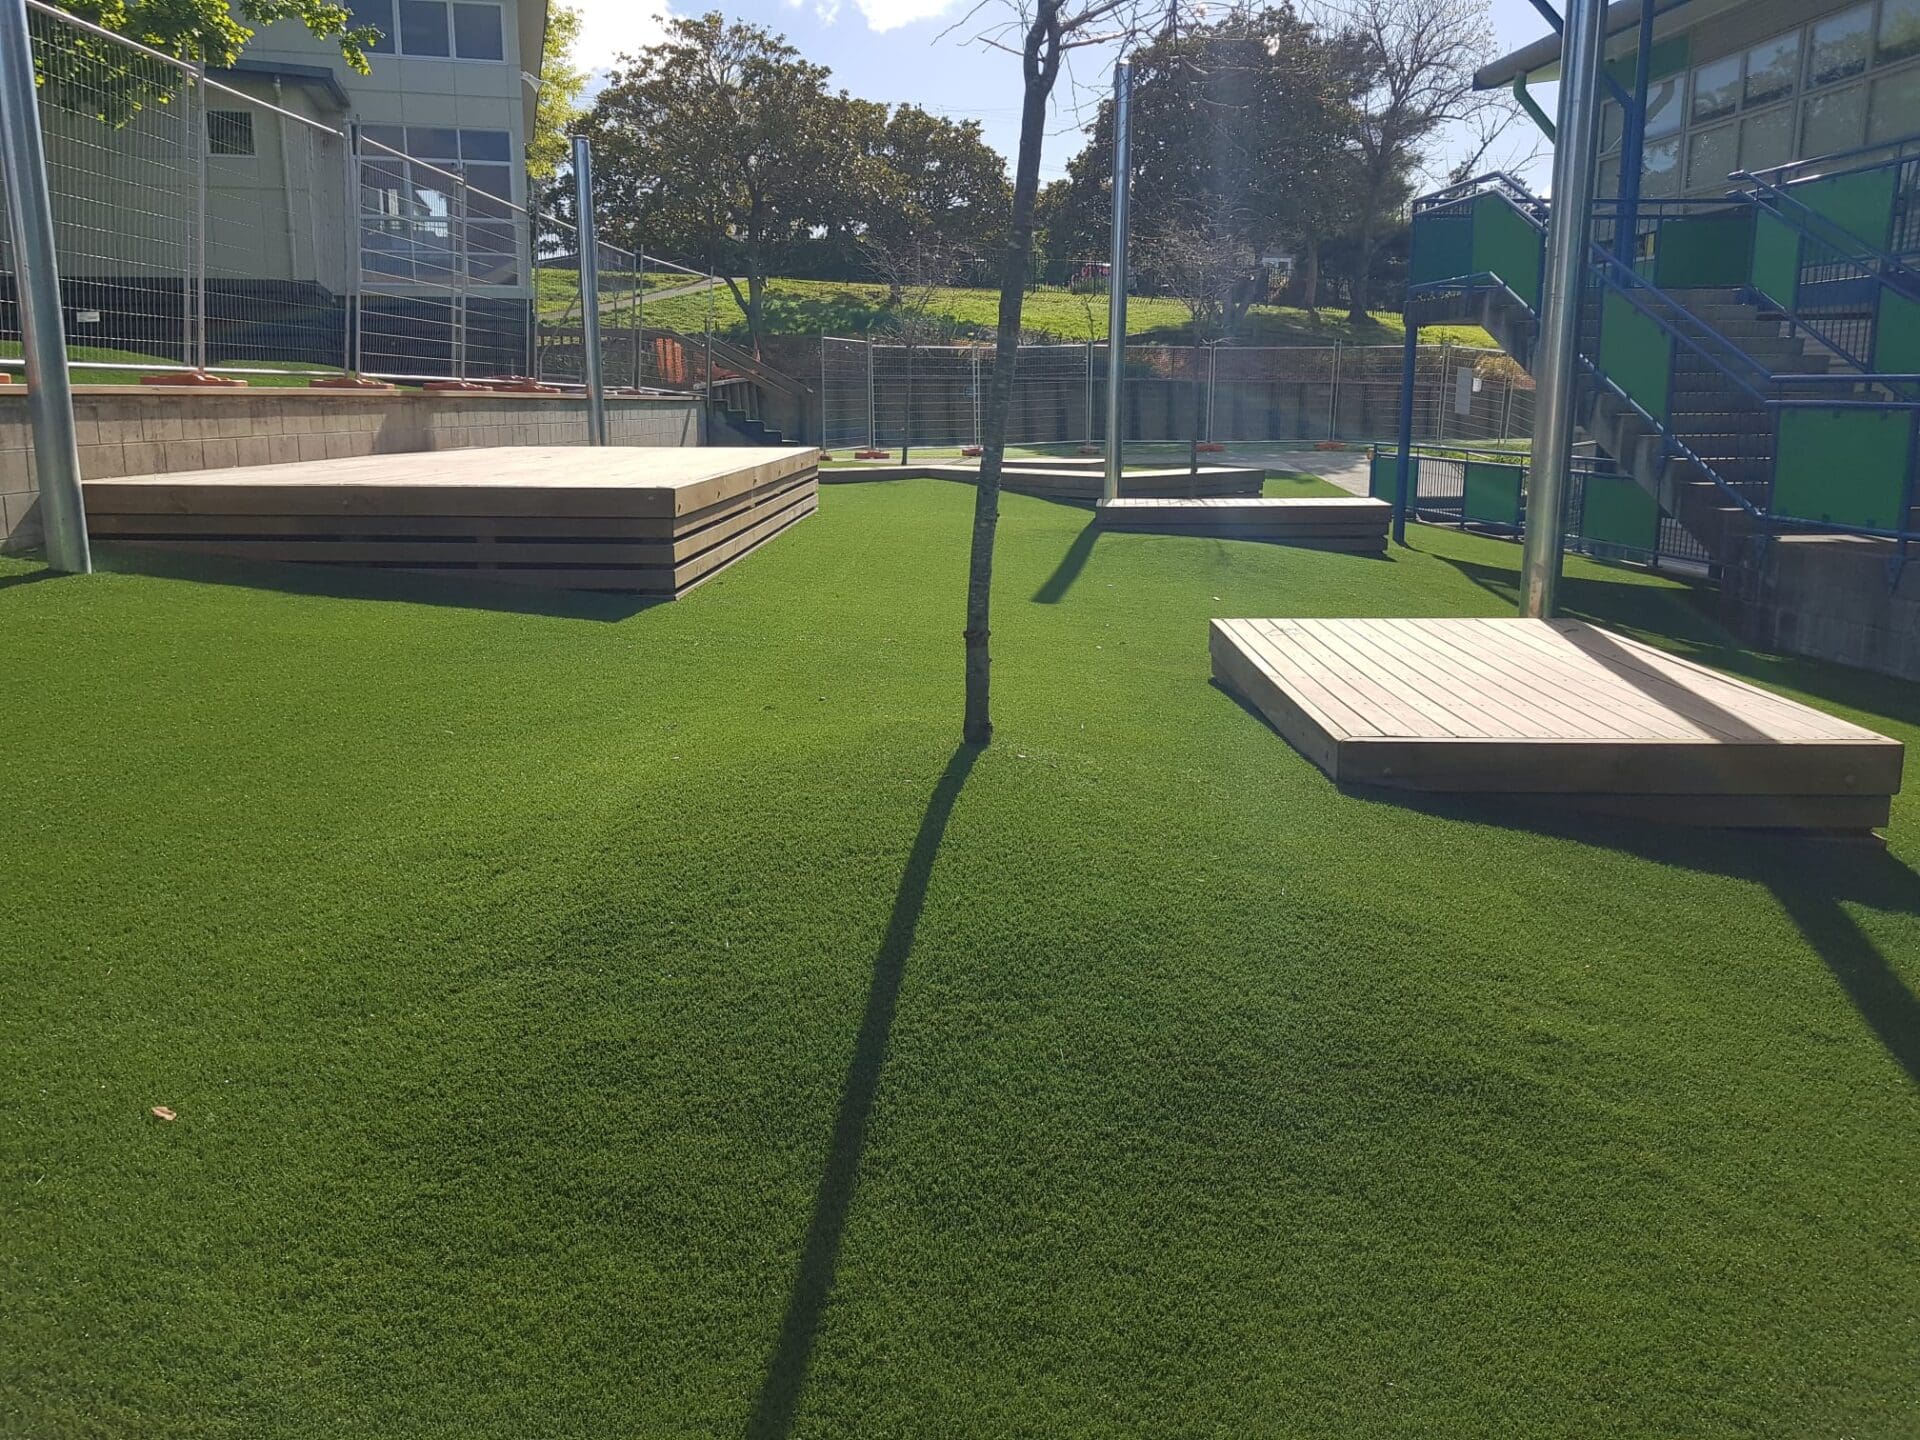 TigerTurf Envy XWR over a free-draining base, with a shade cover above – the perfect lawn